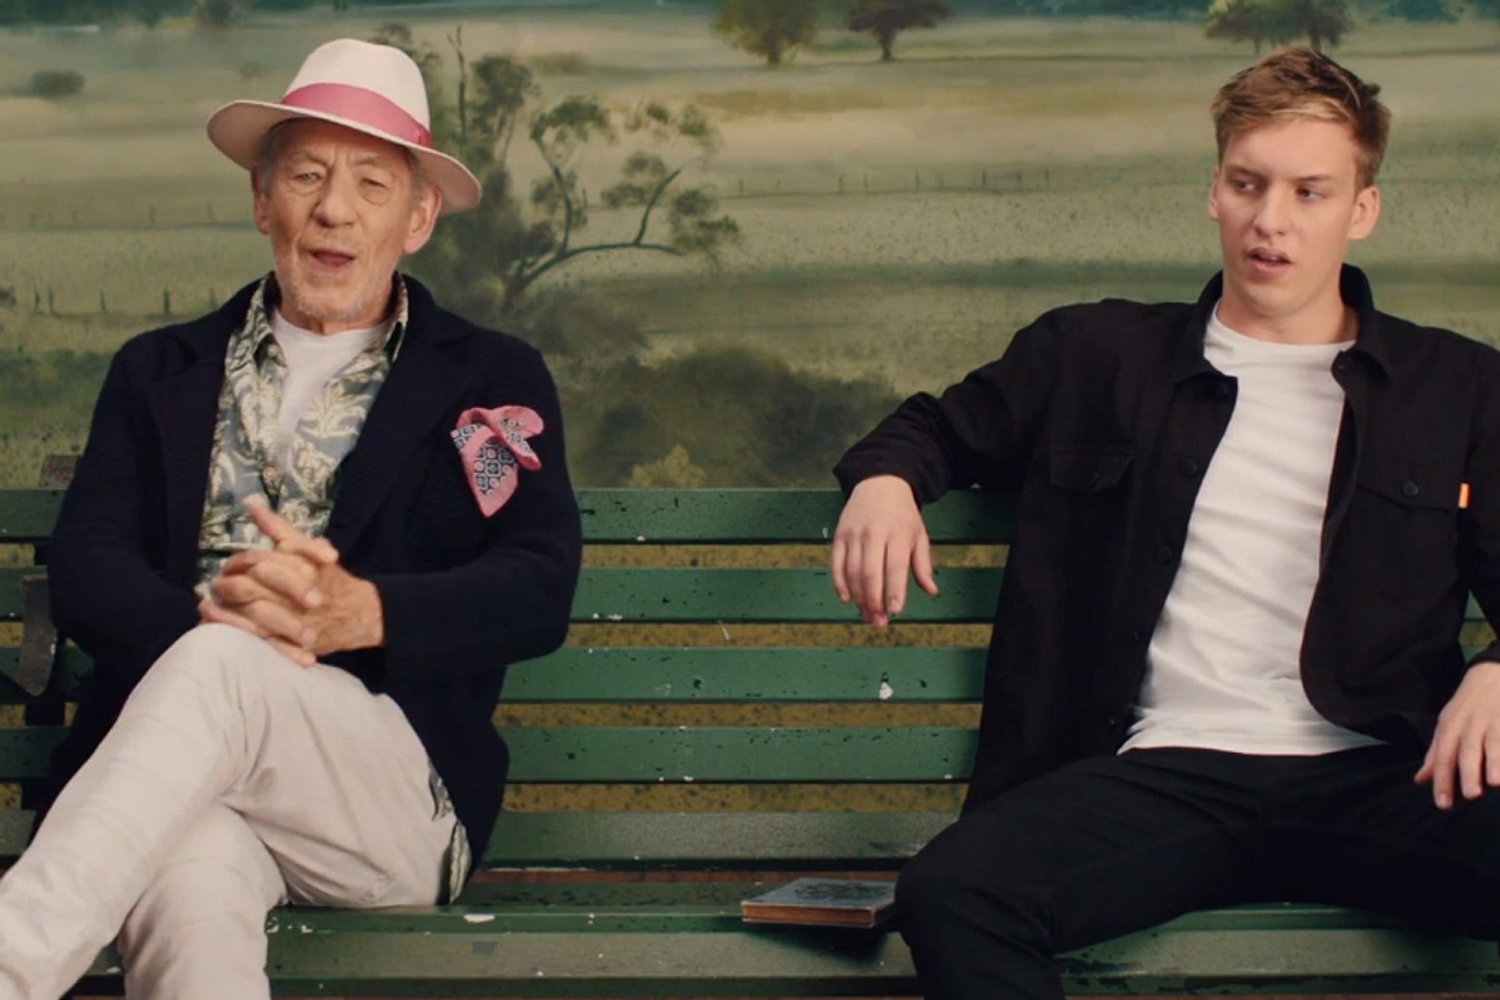 Watch George Ezra and Sir Ian McKellen form a formidable duo in ‘Listen to the Man’